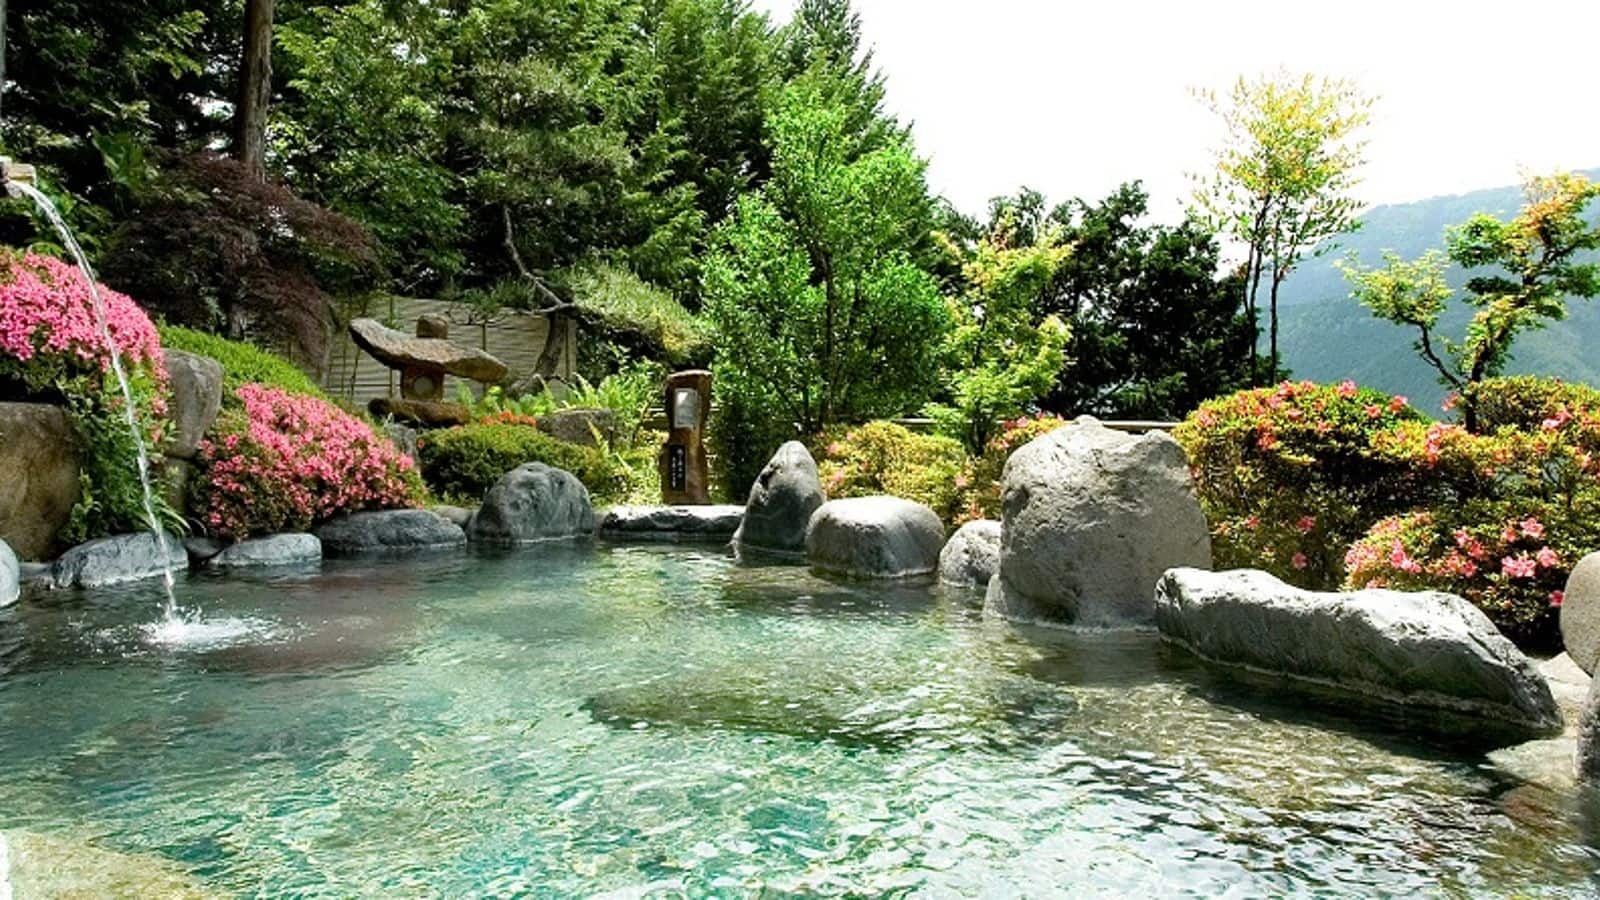 Make your way to Tokyo's tranquil mountain onsen escapes